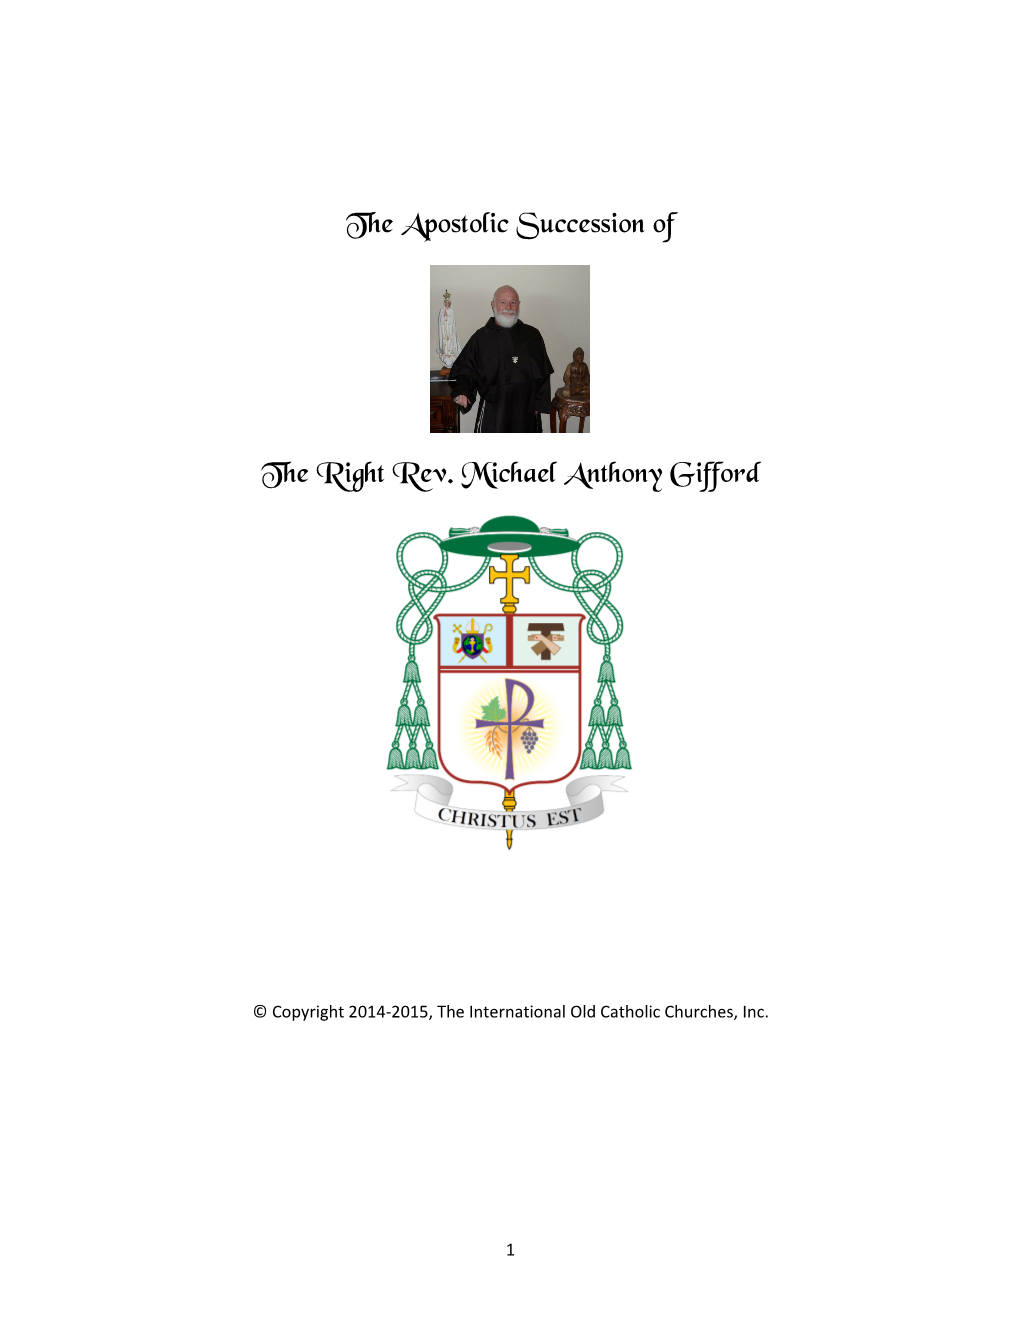 The Apostolic Succession of the Right Rev. Michael Anthony Gifford